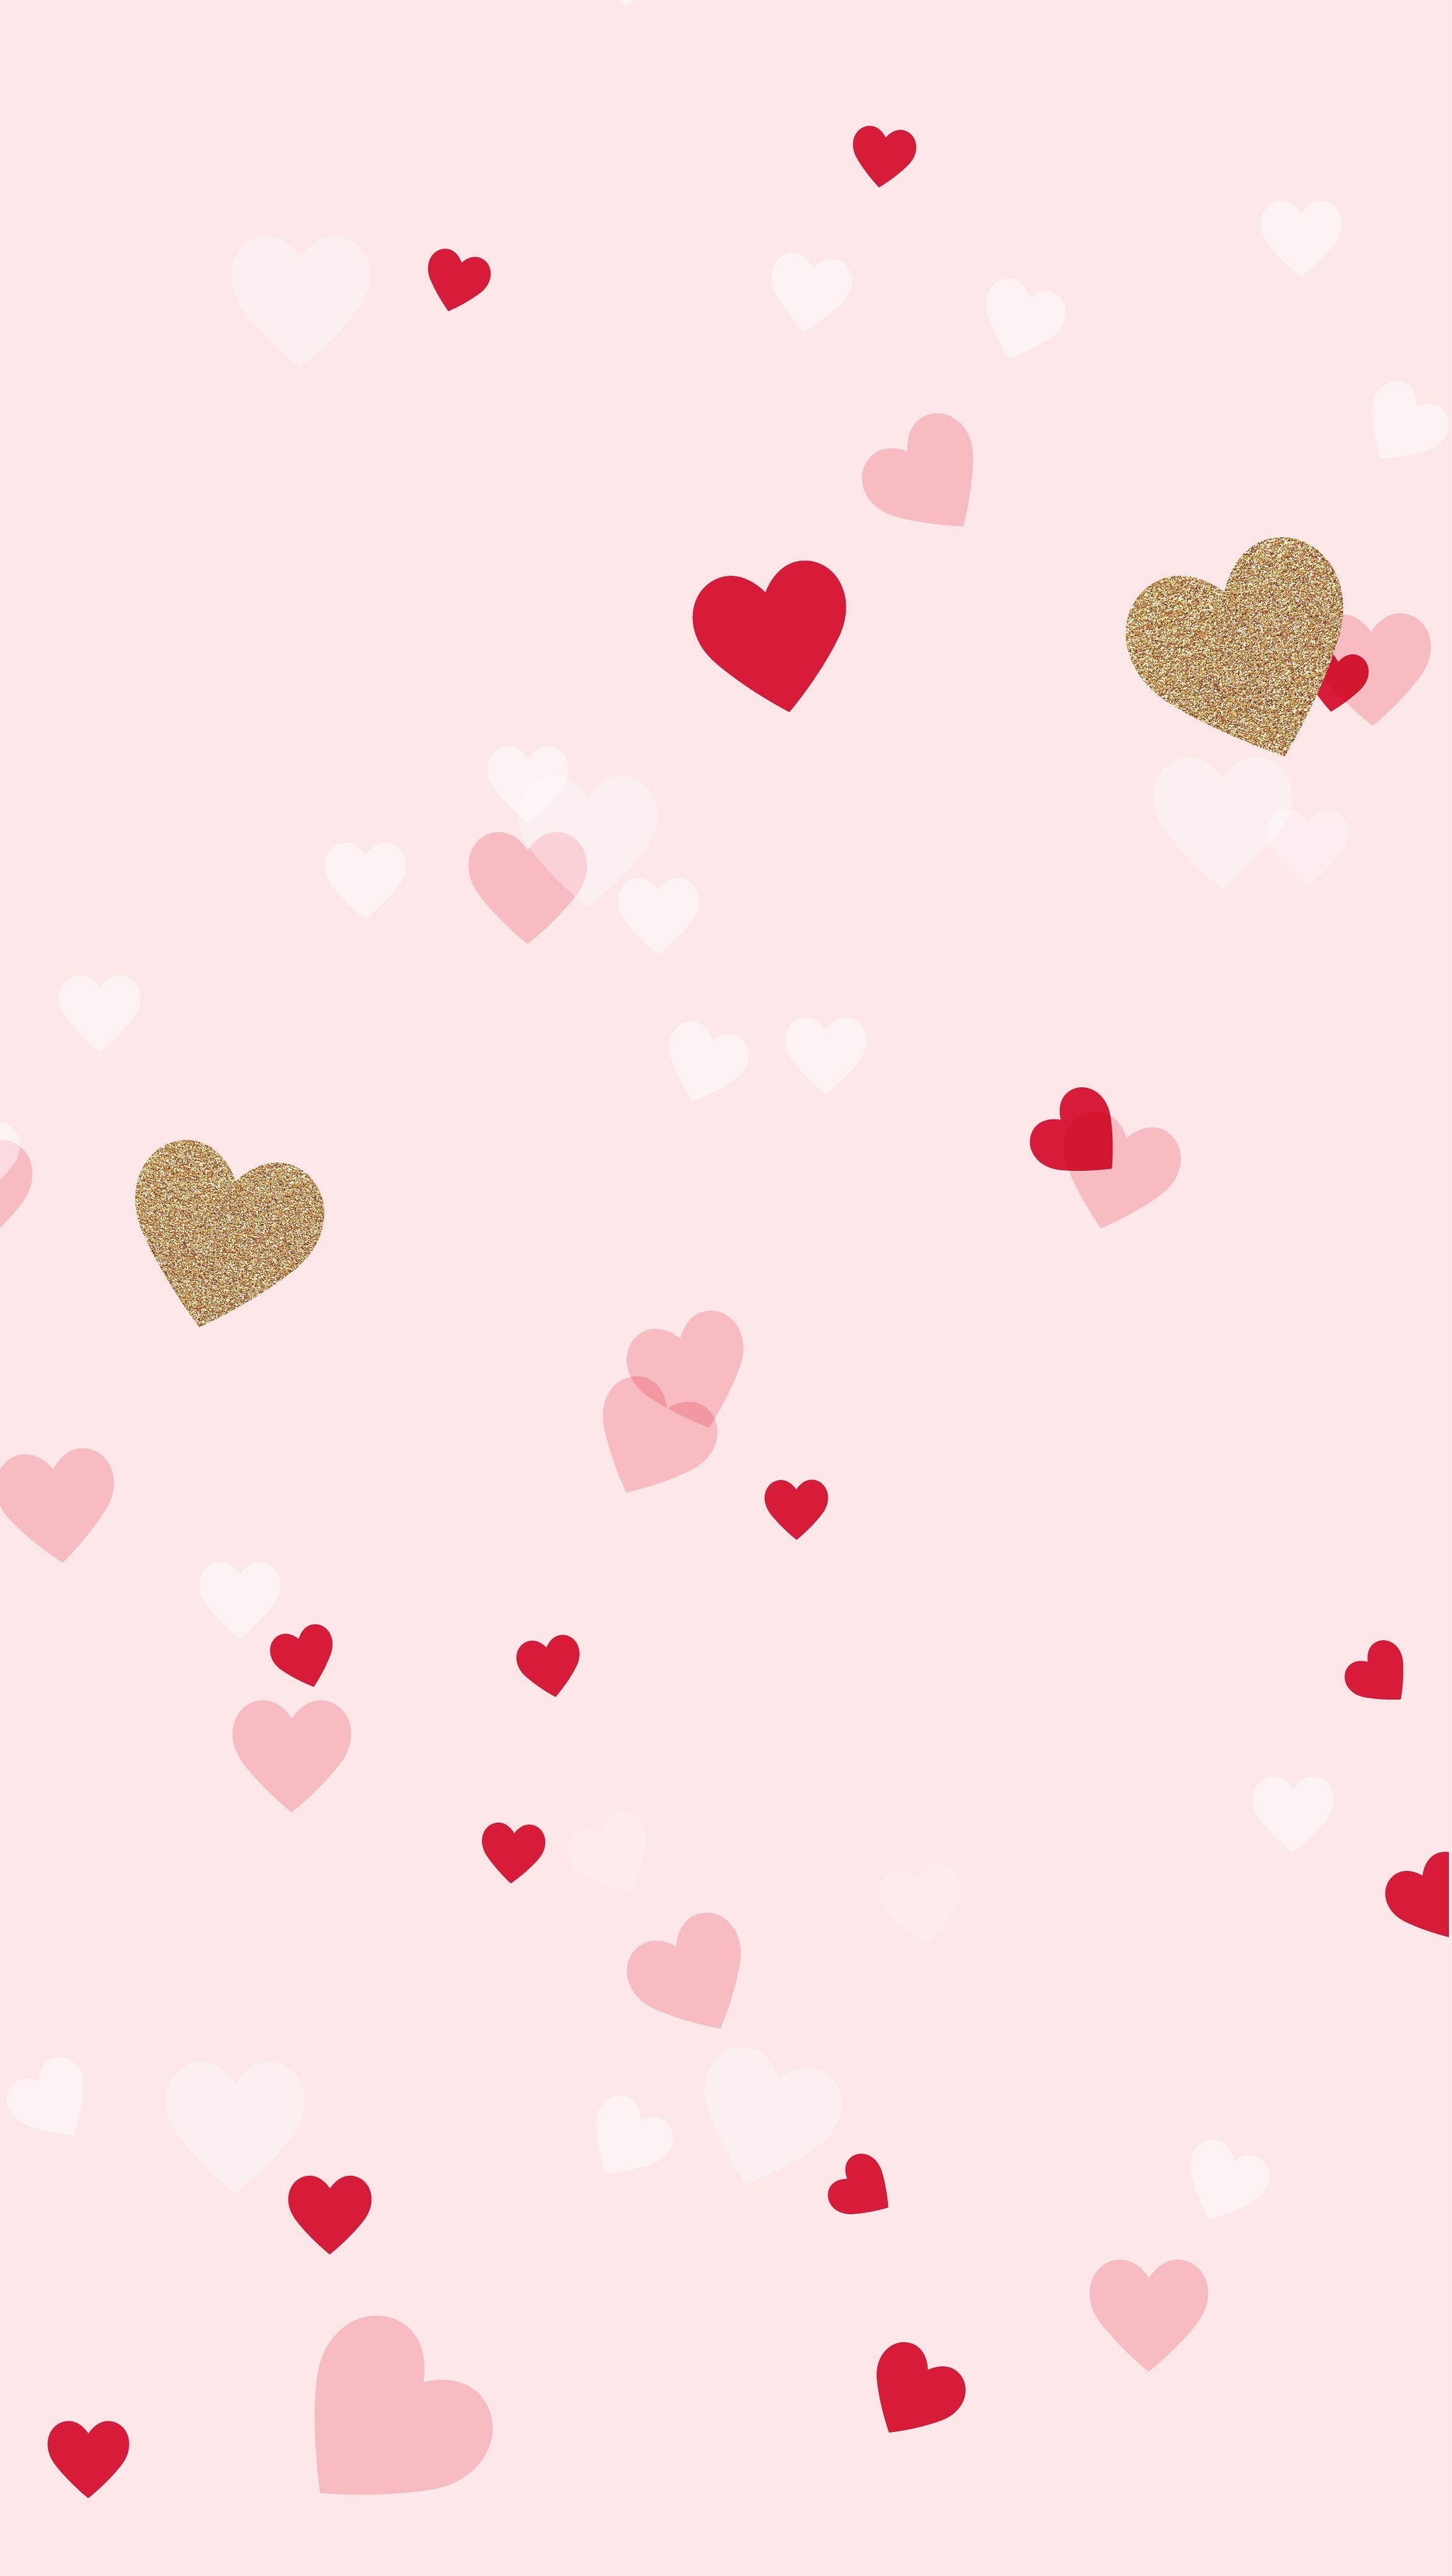 100+] Valentines Day Phone Background s | Wallpapers.com